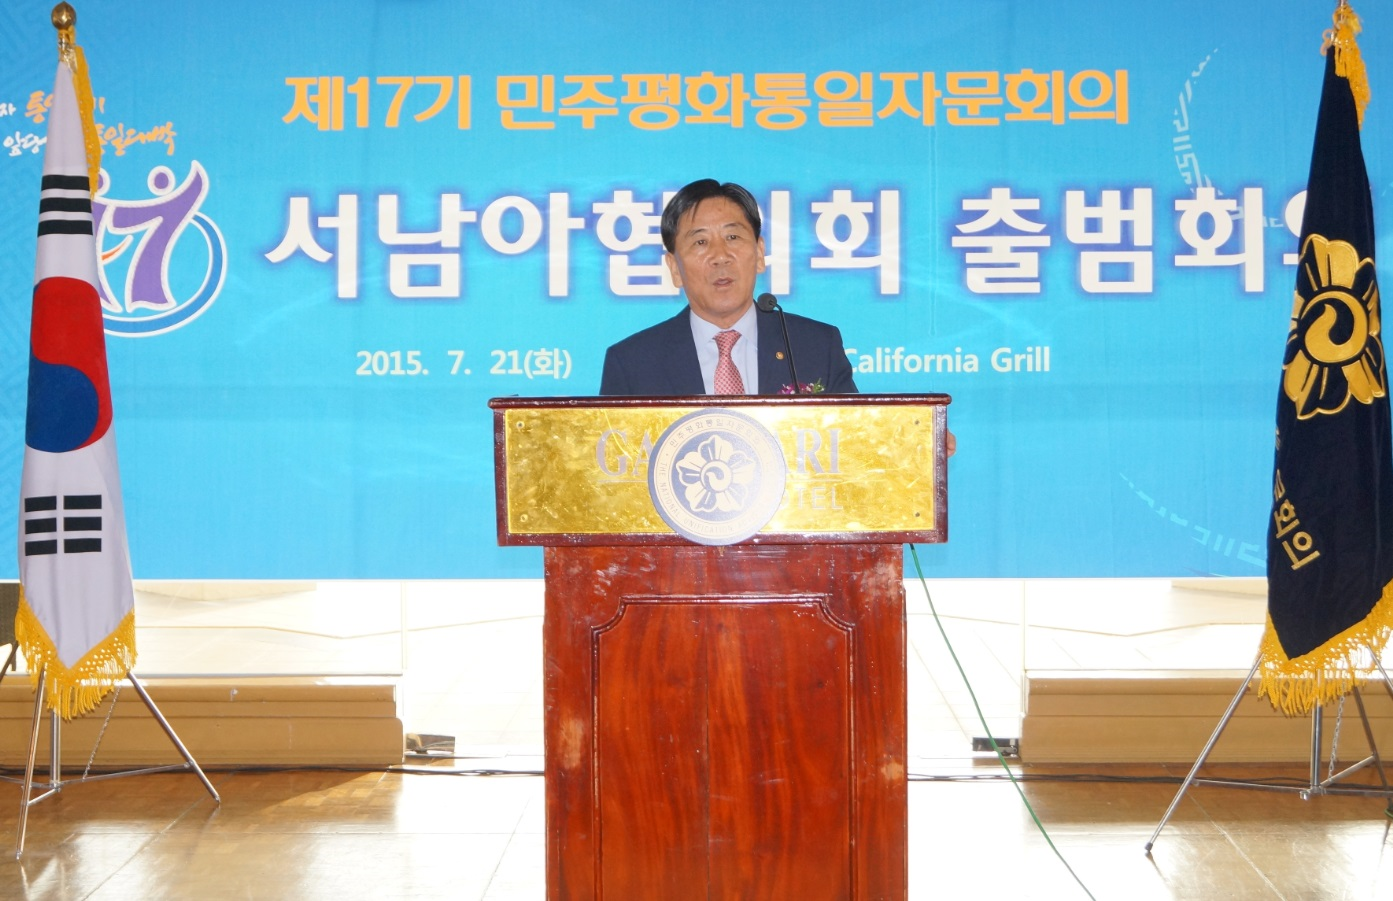 ▶In his opening speech, head of the Chapter Eom Gyeong-ho said, “I urge the council members to take the lead in gathering the opinions of Koreans living abroad in the unification of Korea and encouraging them to contribute to opening the era of unified Korea by renewing their resolve and concentrating their capabilities. I want you to build a basis for the unity of Koreans living abroad by creating an atmosphere for the unification of Korea.